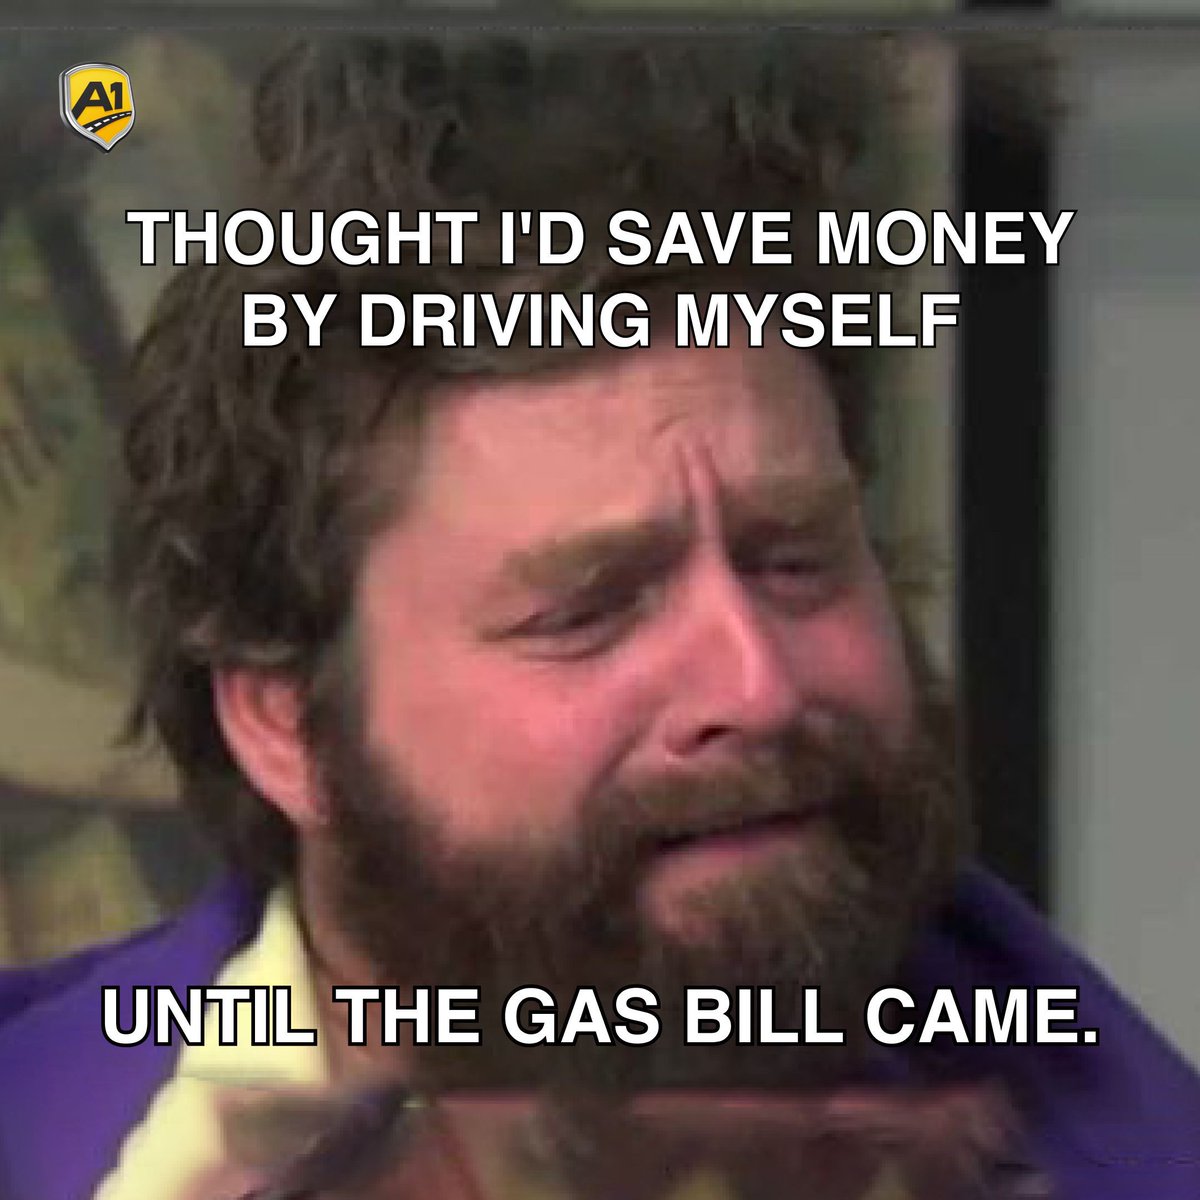 🌟 Thought I'd save money by driving myself... until the gas bill came. 🚗💸

Should've called A1 Auto Transport for a wallet-friendly move! 😂🚗

👉 Get a free shipping estimate: a1autotransport.com

#autotransport #carshipping #autoshipping #vehicleshipping #cartransport